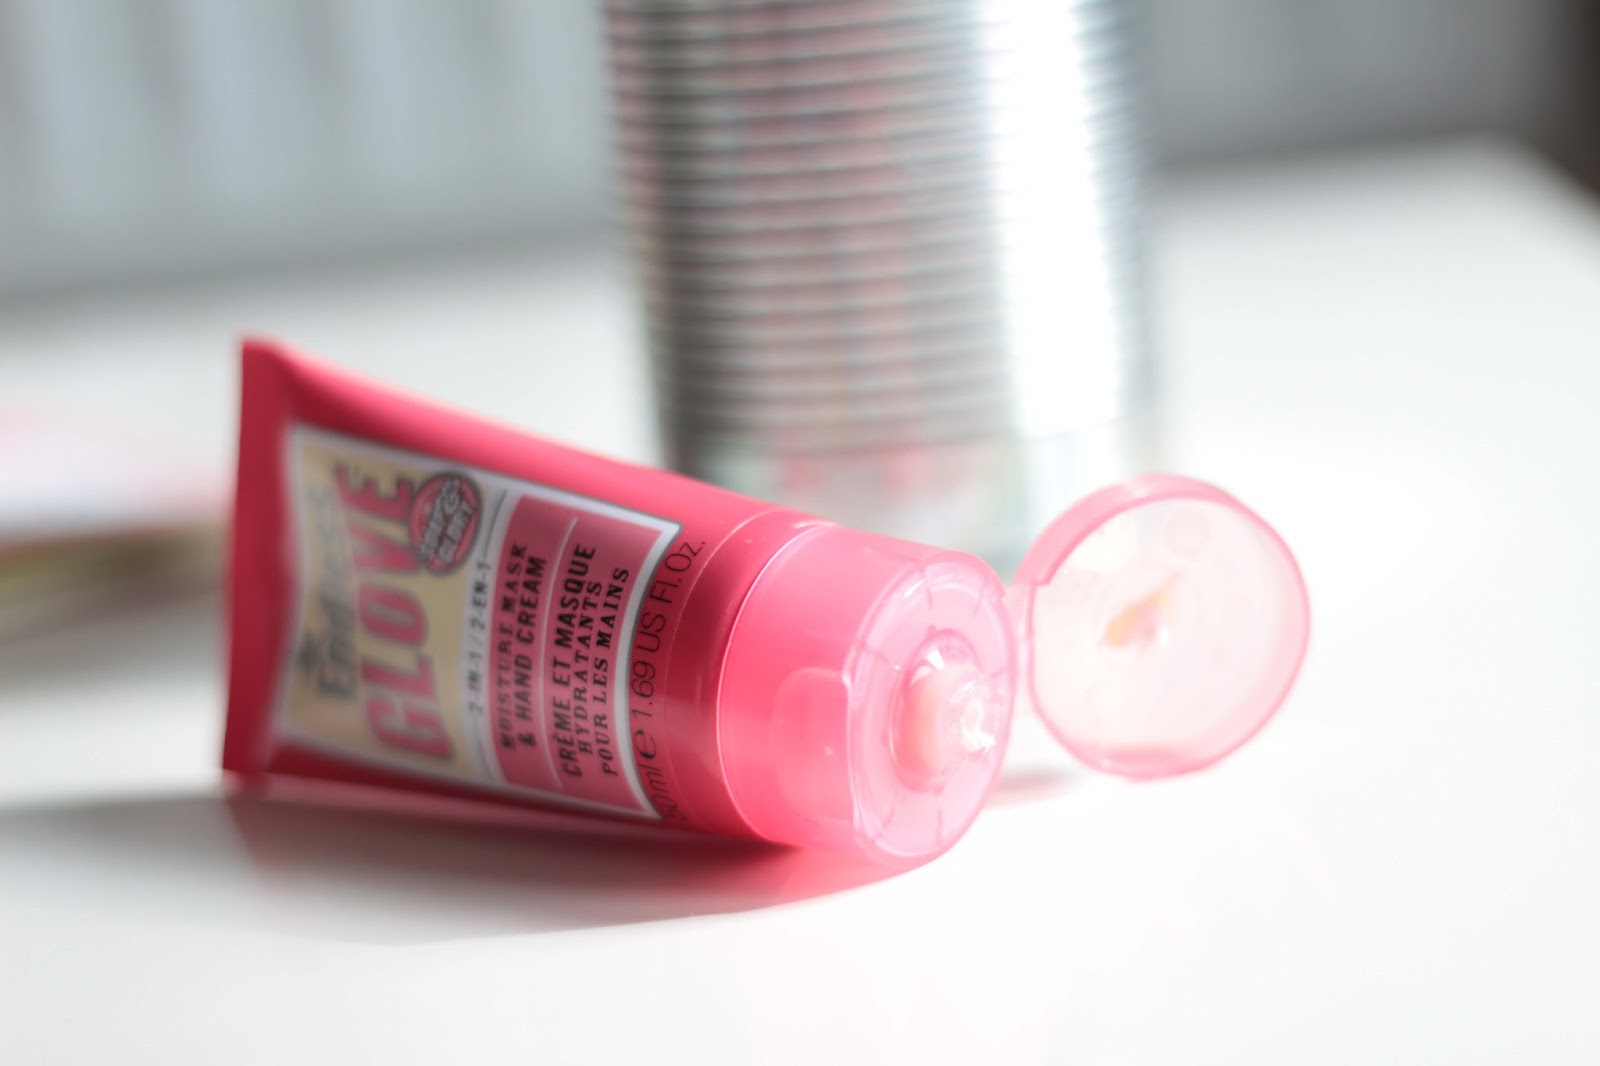 soap & glory endless glove 2 in 1 moisture mask and hand cream review